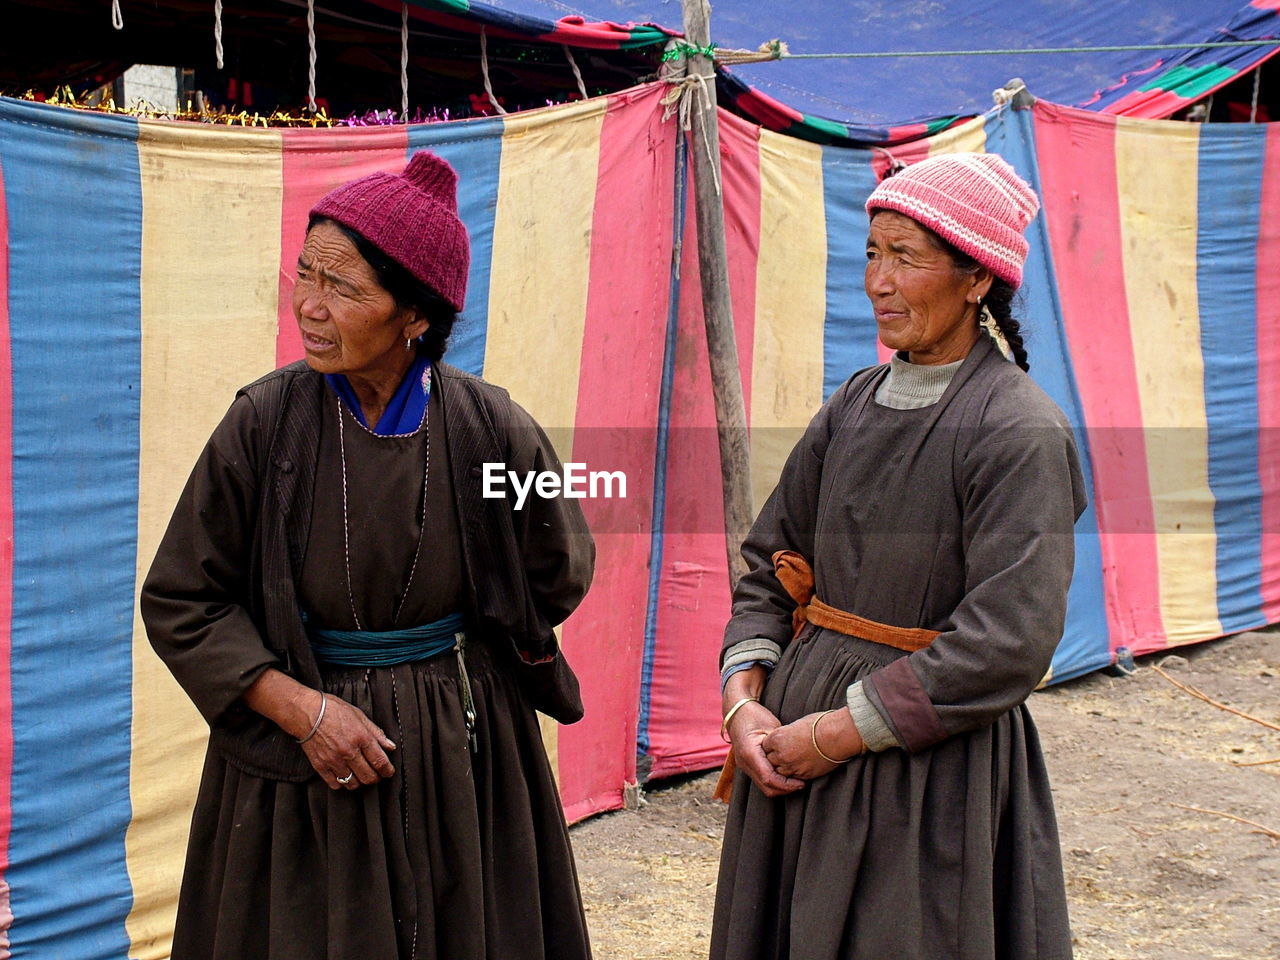 Mature women wearing traditional clothing standing by tent